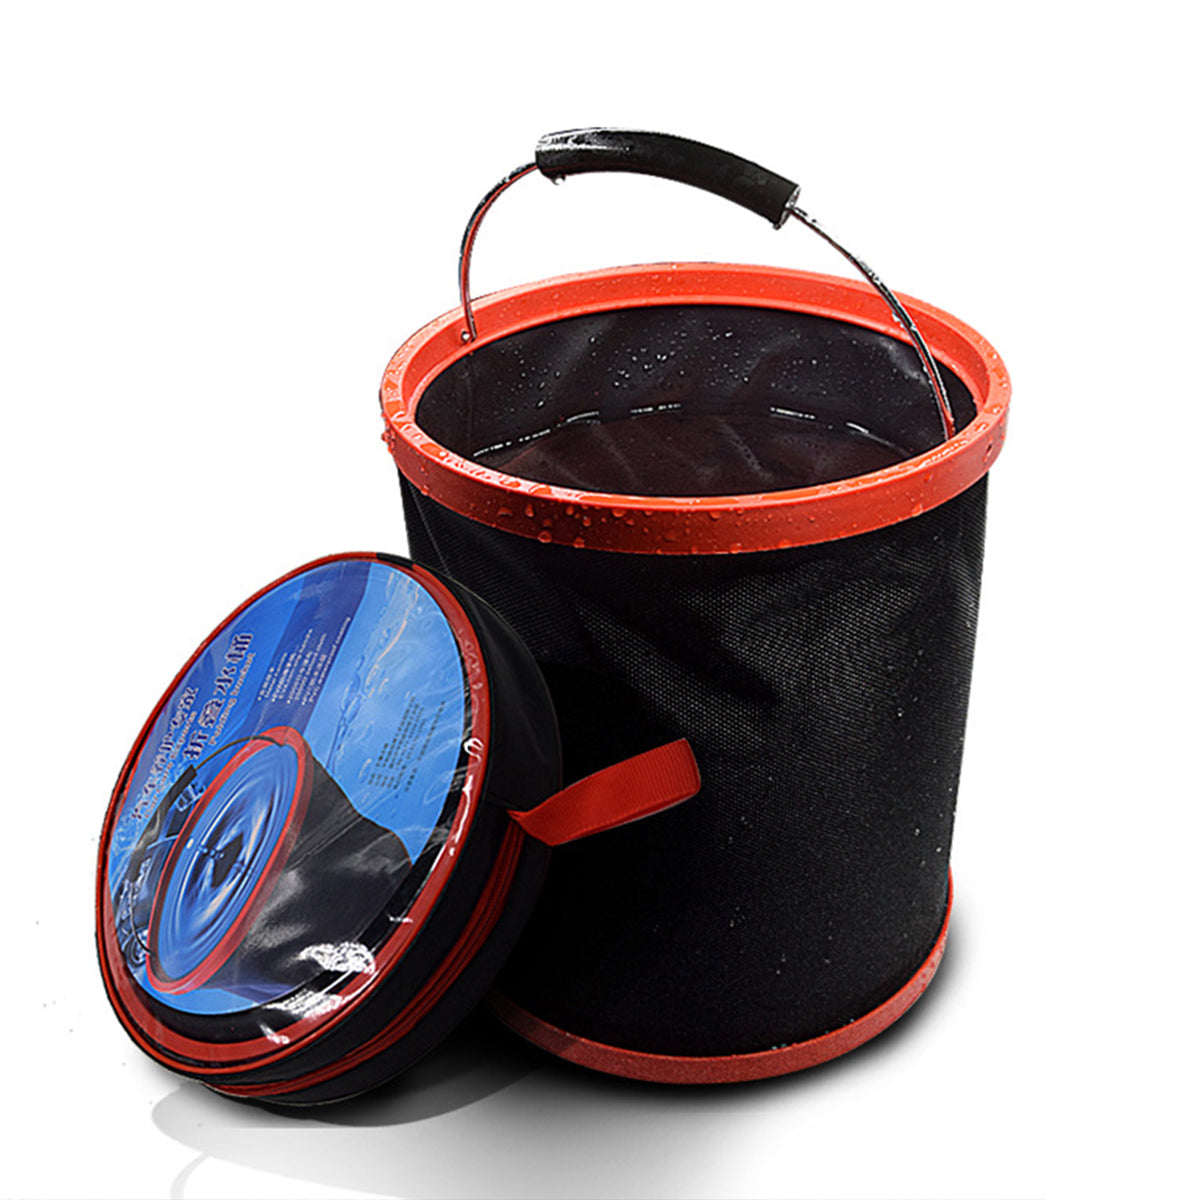 Black 12L Collapsible Folding Water Bucket For Outdoor Boating Camping Fishing Car Washing